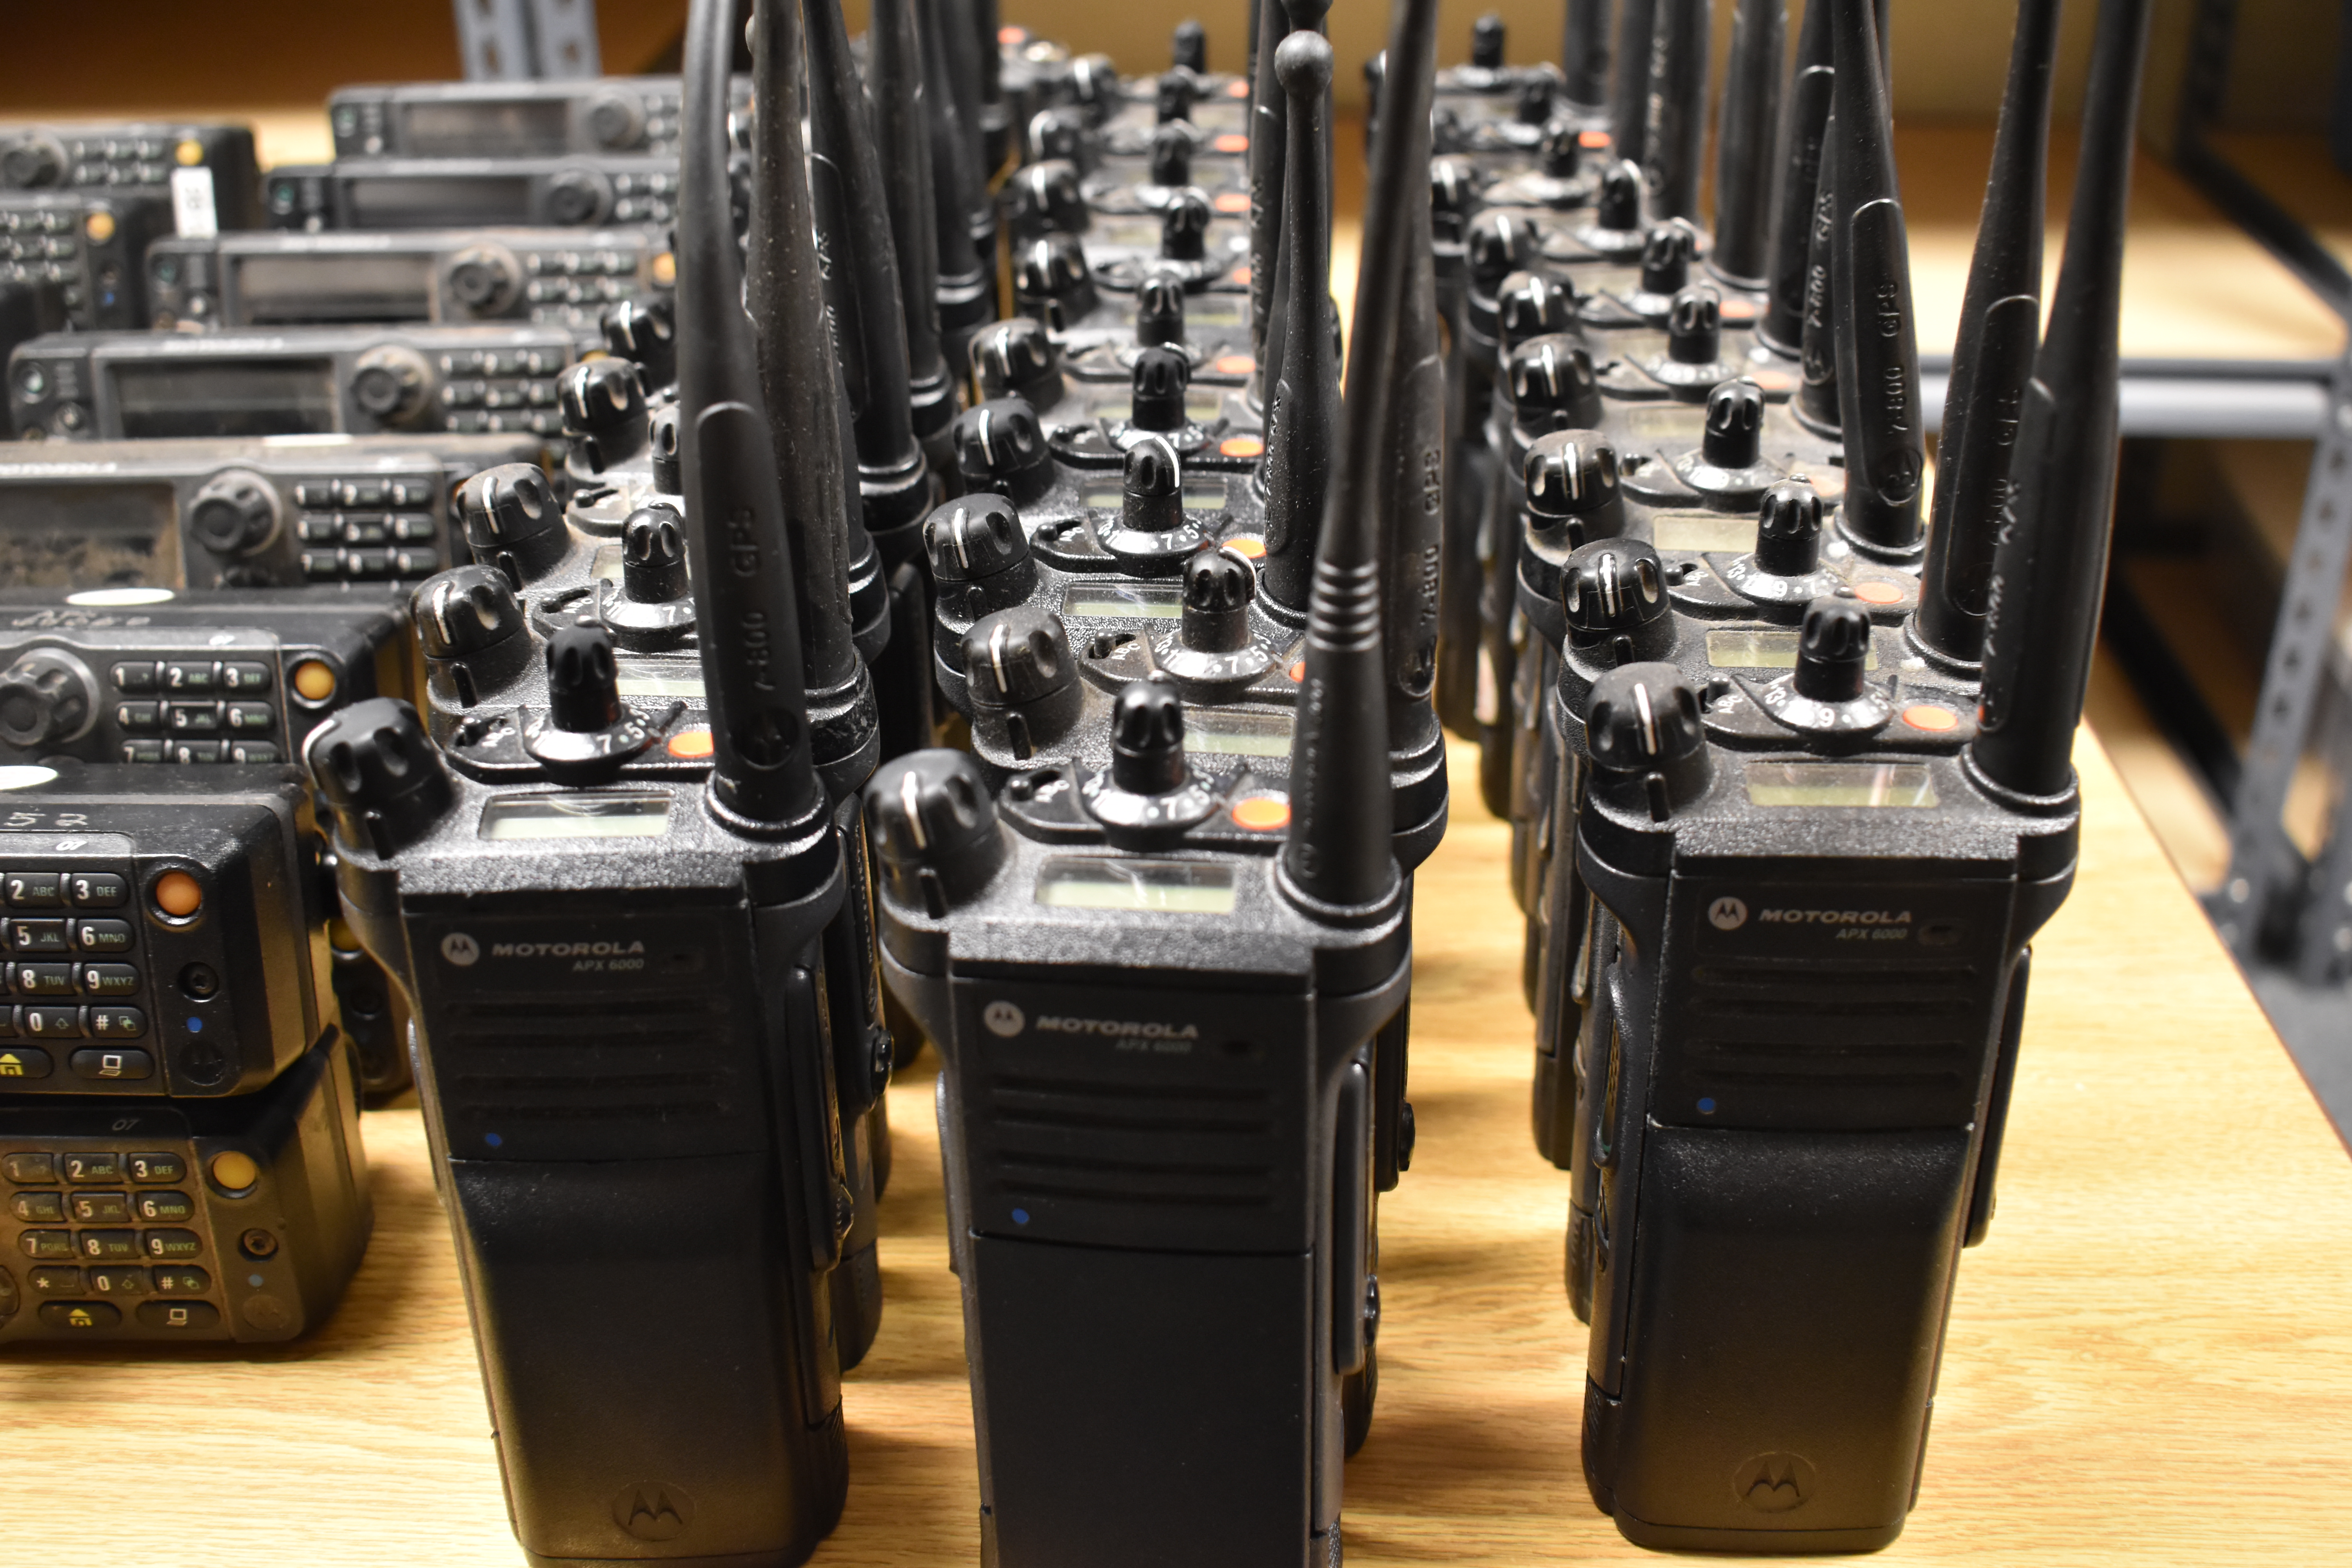 Photo of radios lined up on the table.